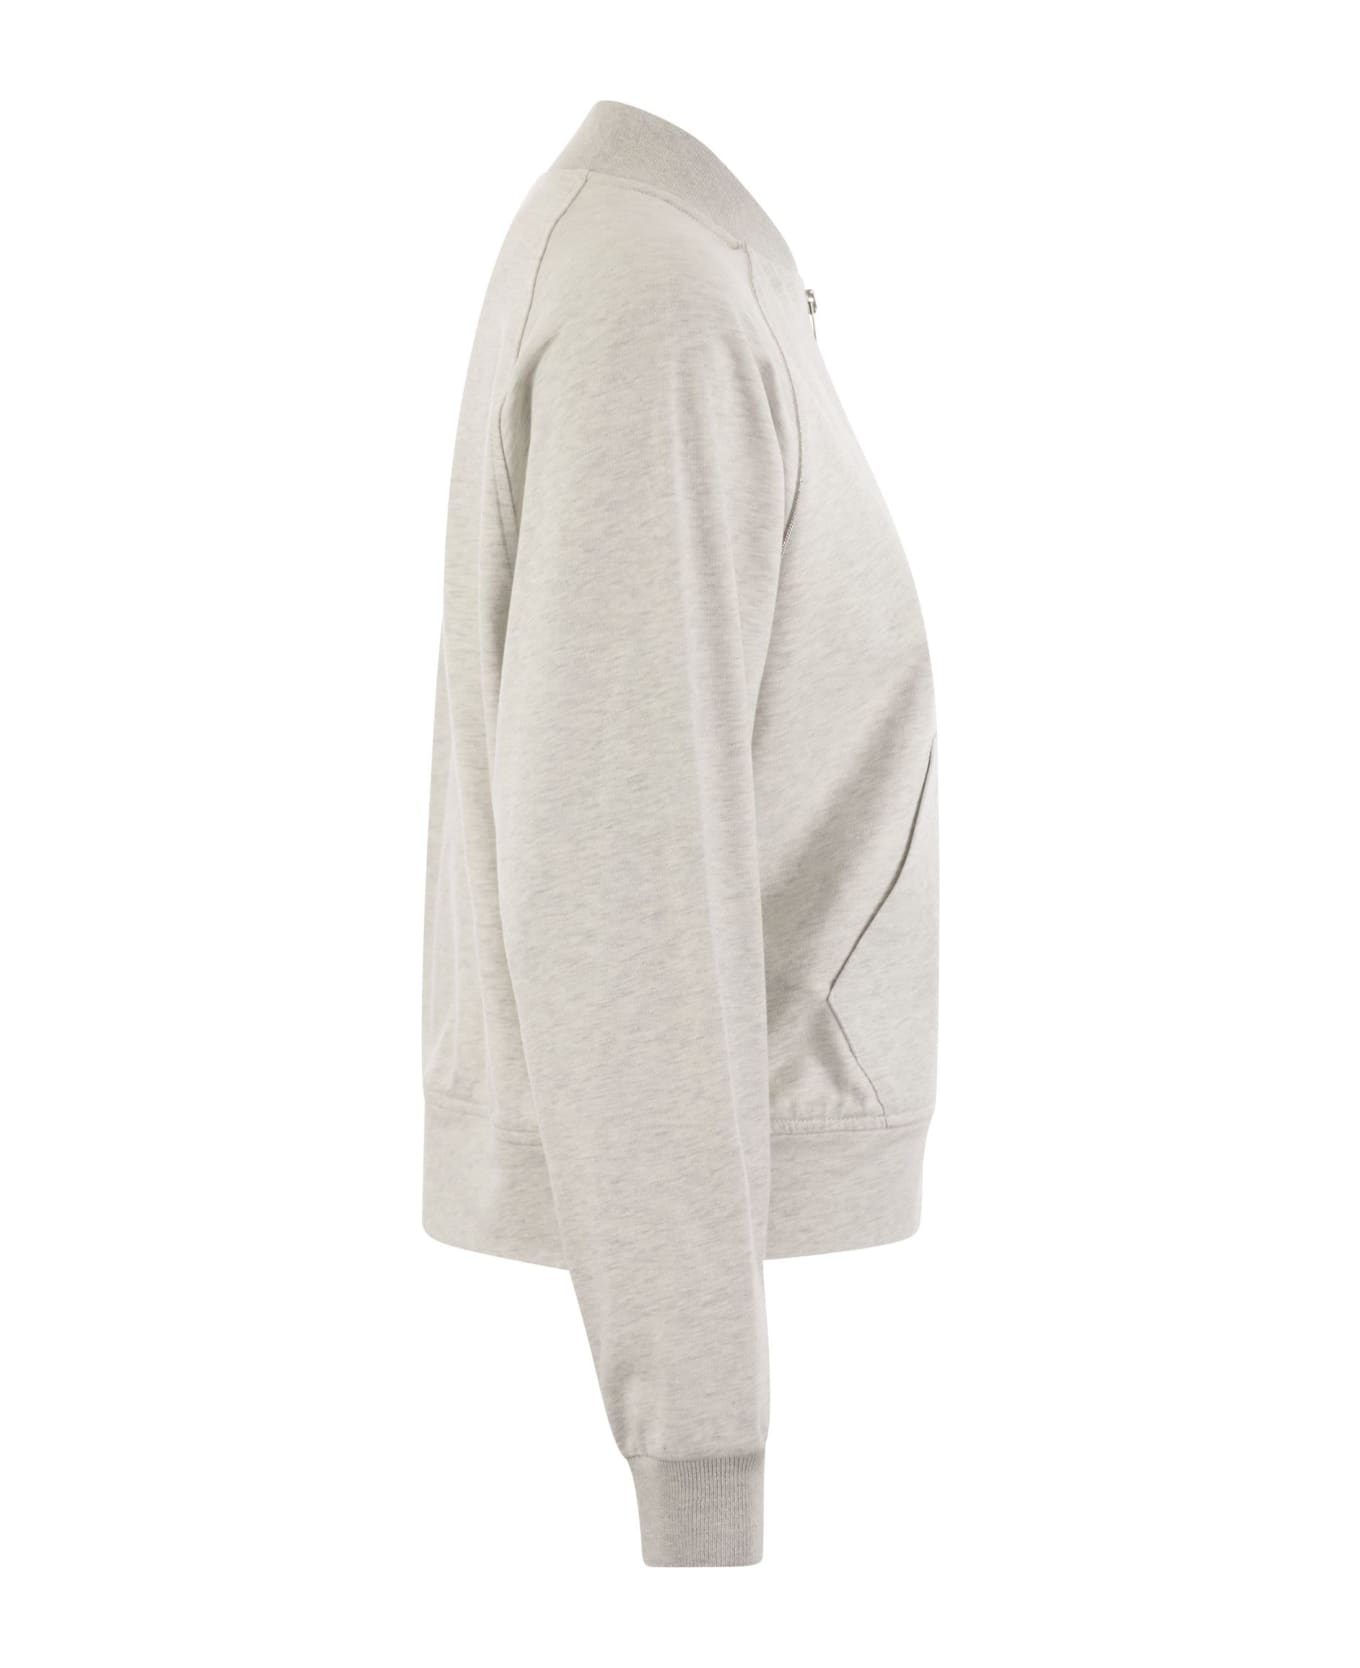 Peserico Sweatshirt In Cotton Mélange And Tricot Details - Grey ジャケット